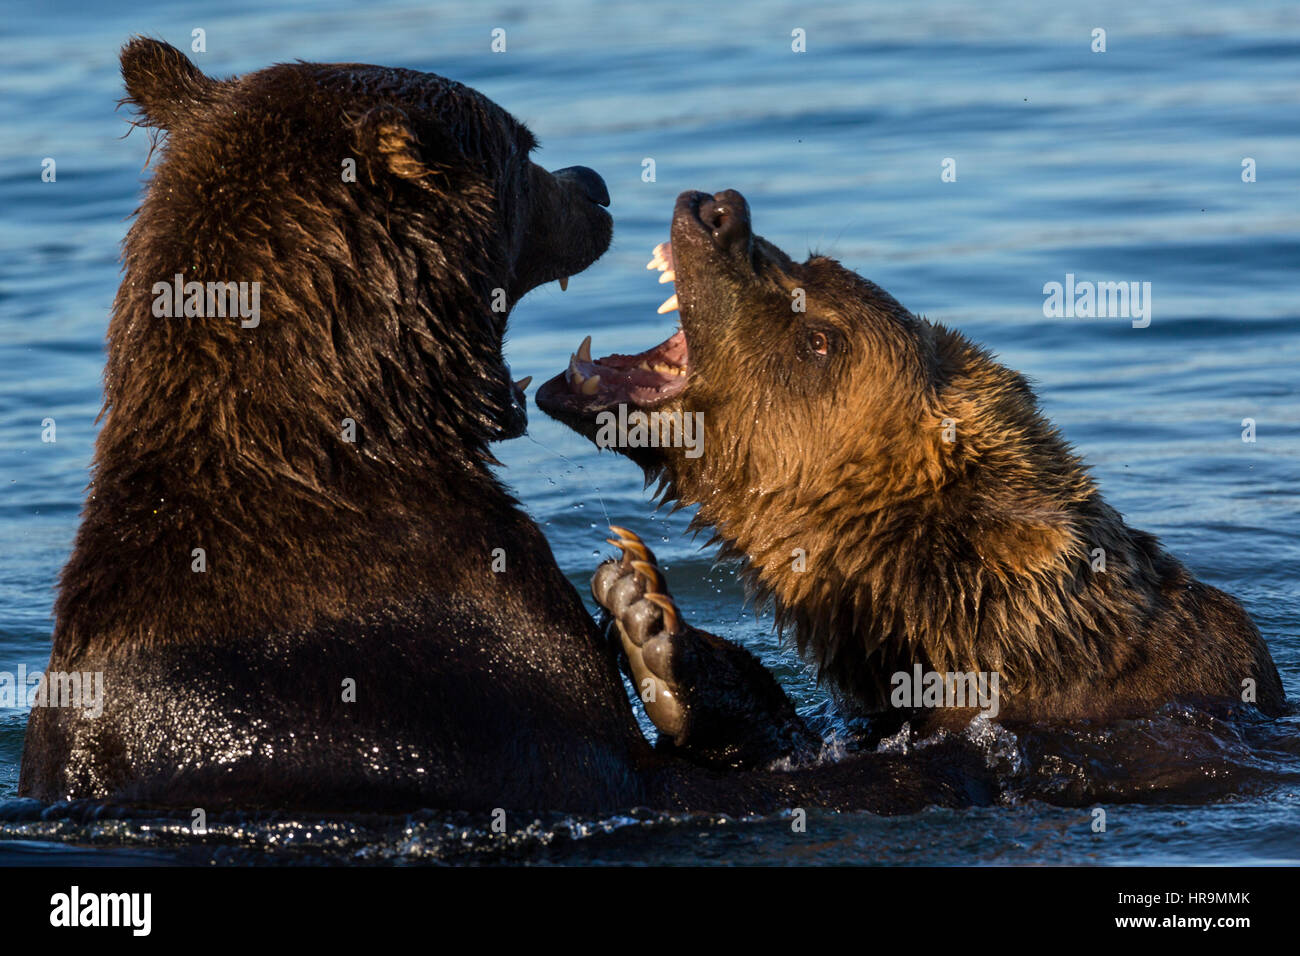 A pair of wild bears fighting in a lake in their natural habitat Stock Photo